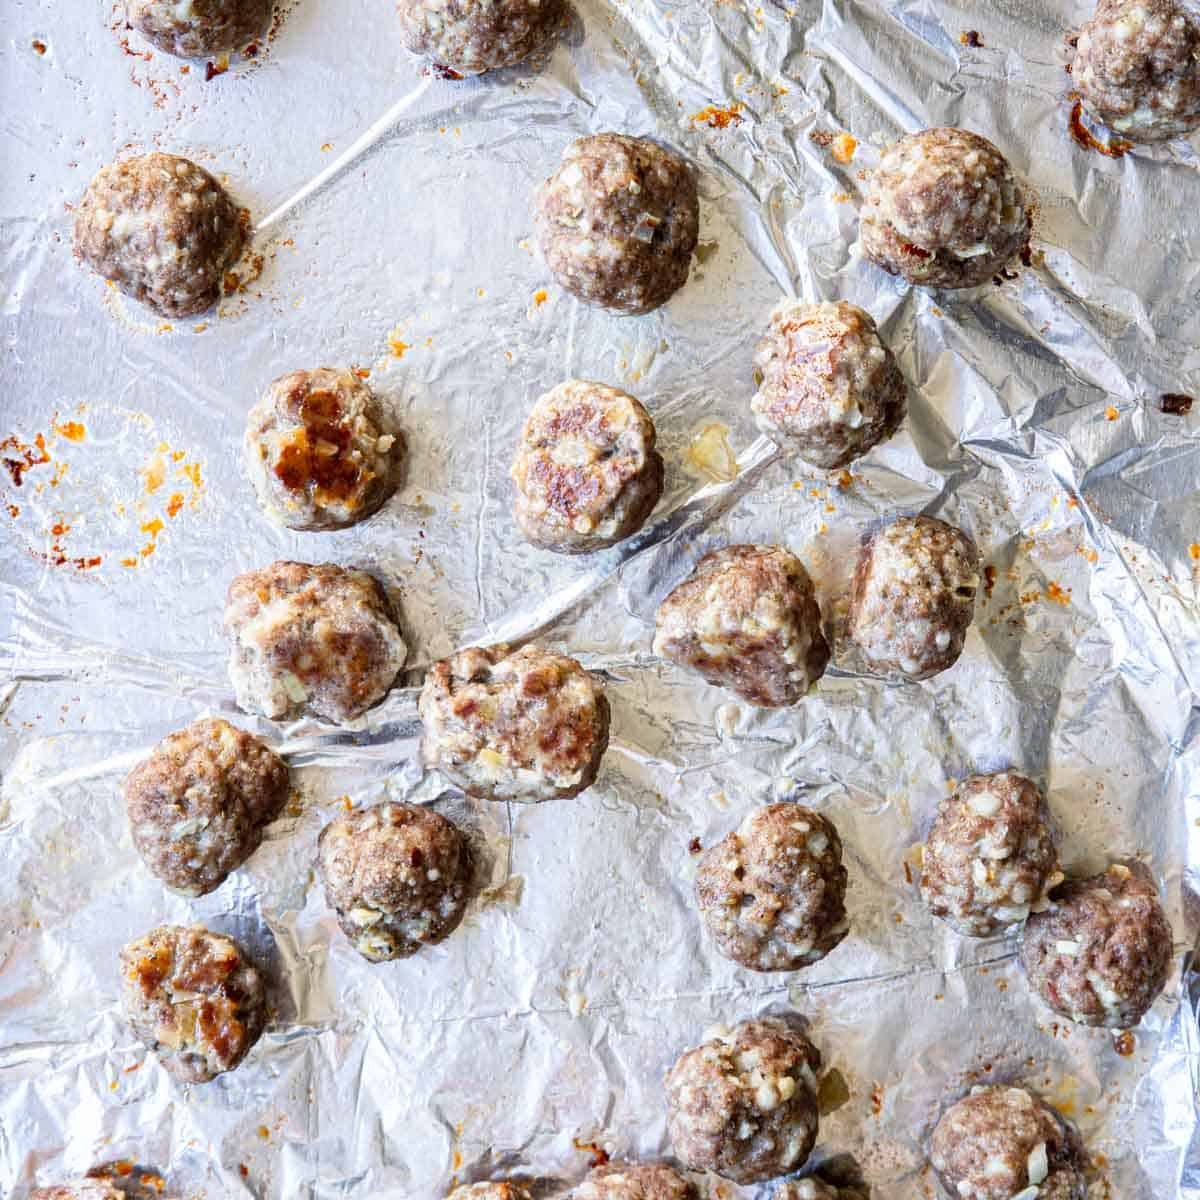 meatballs that have been baked